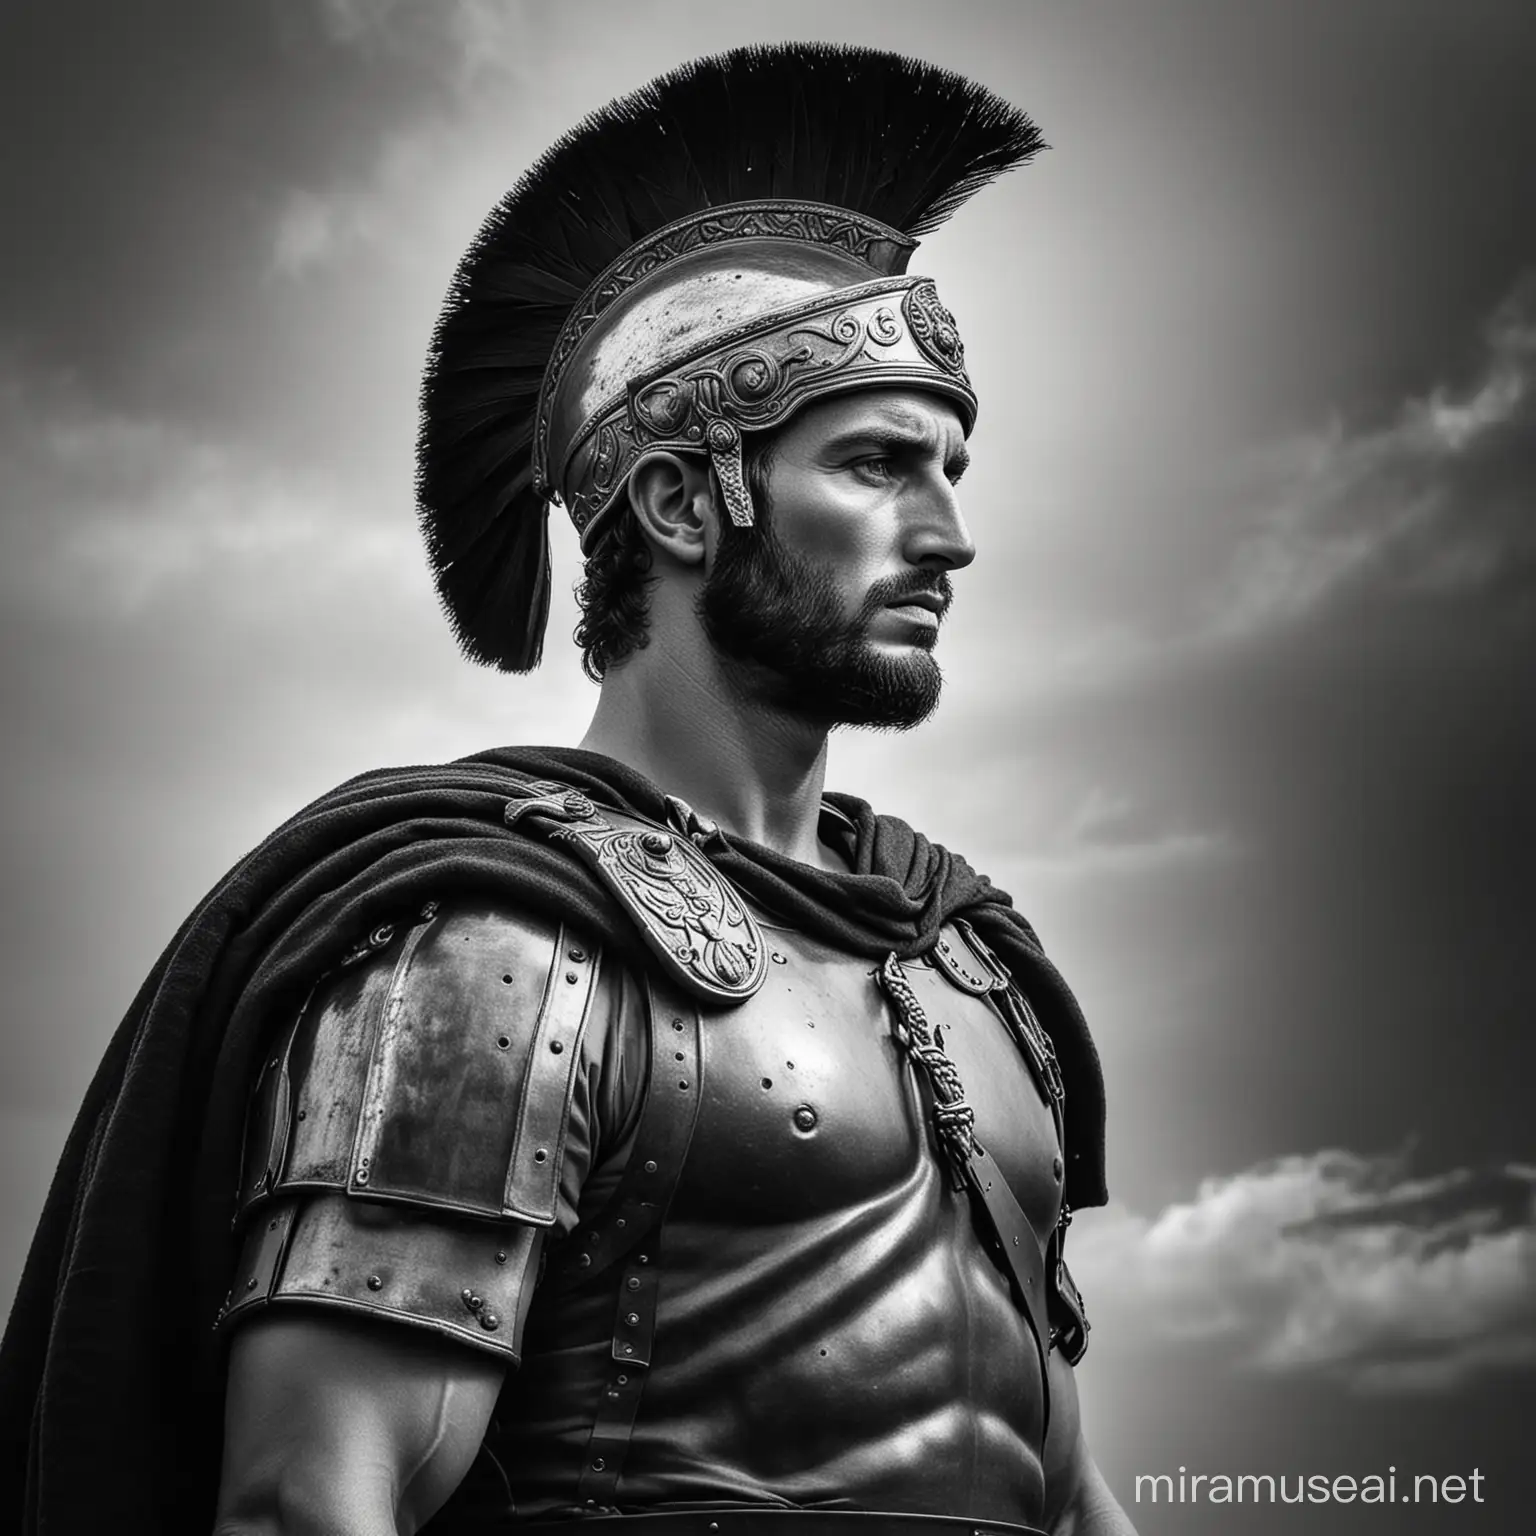 Majestic roman soldier in black and white

